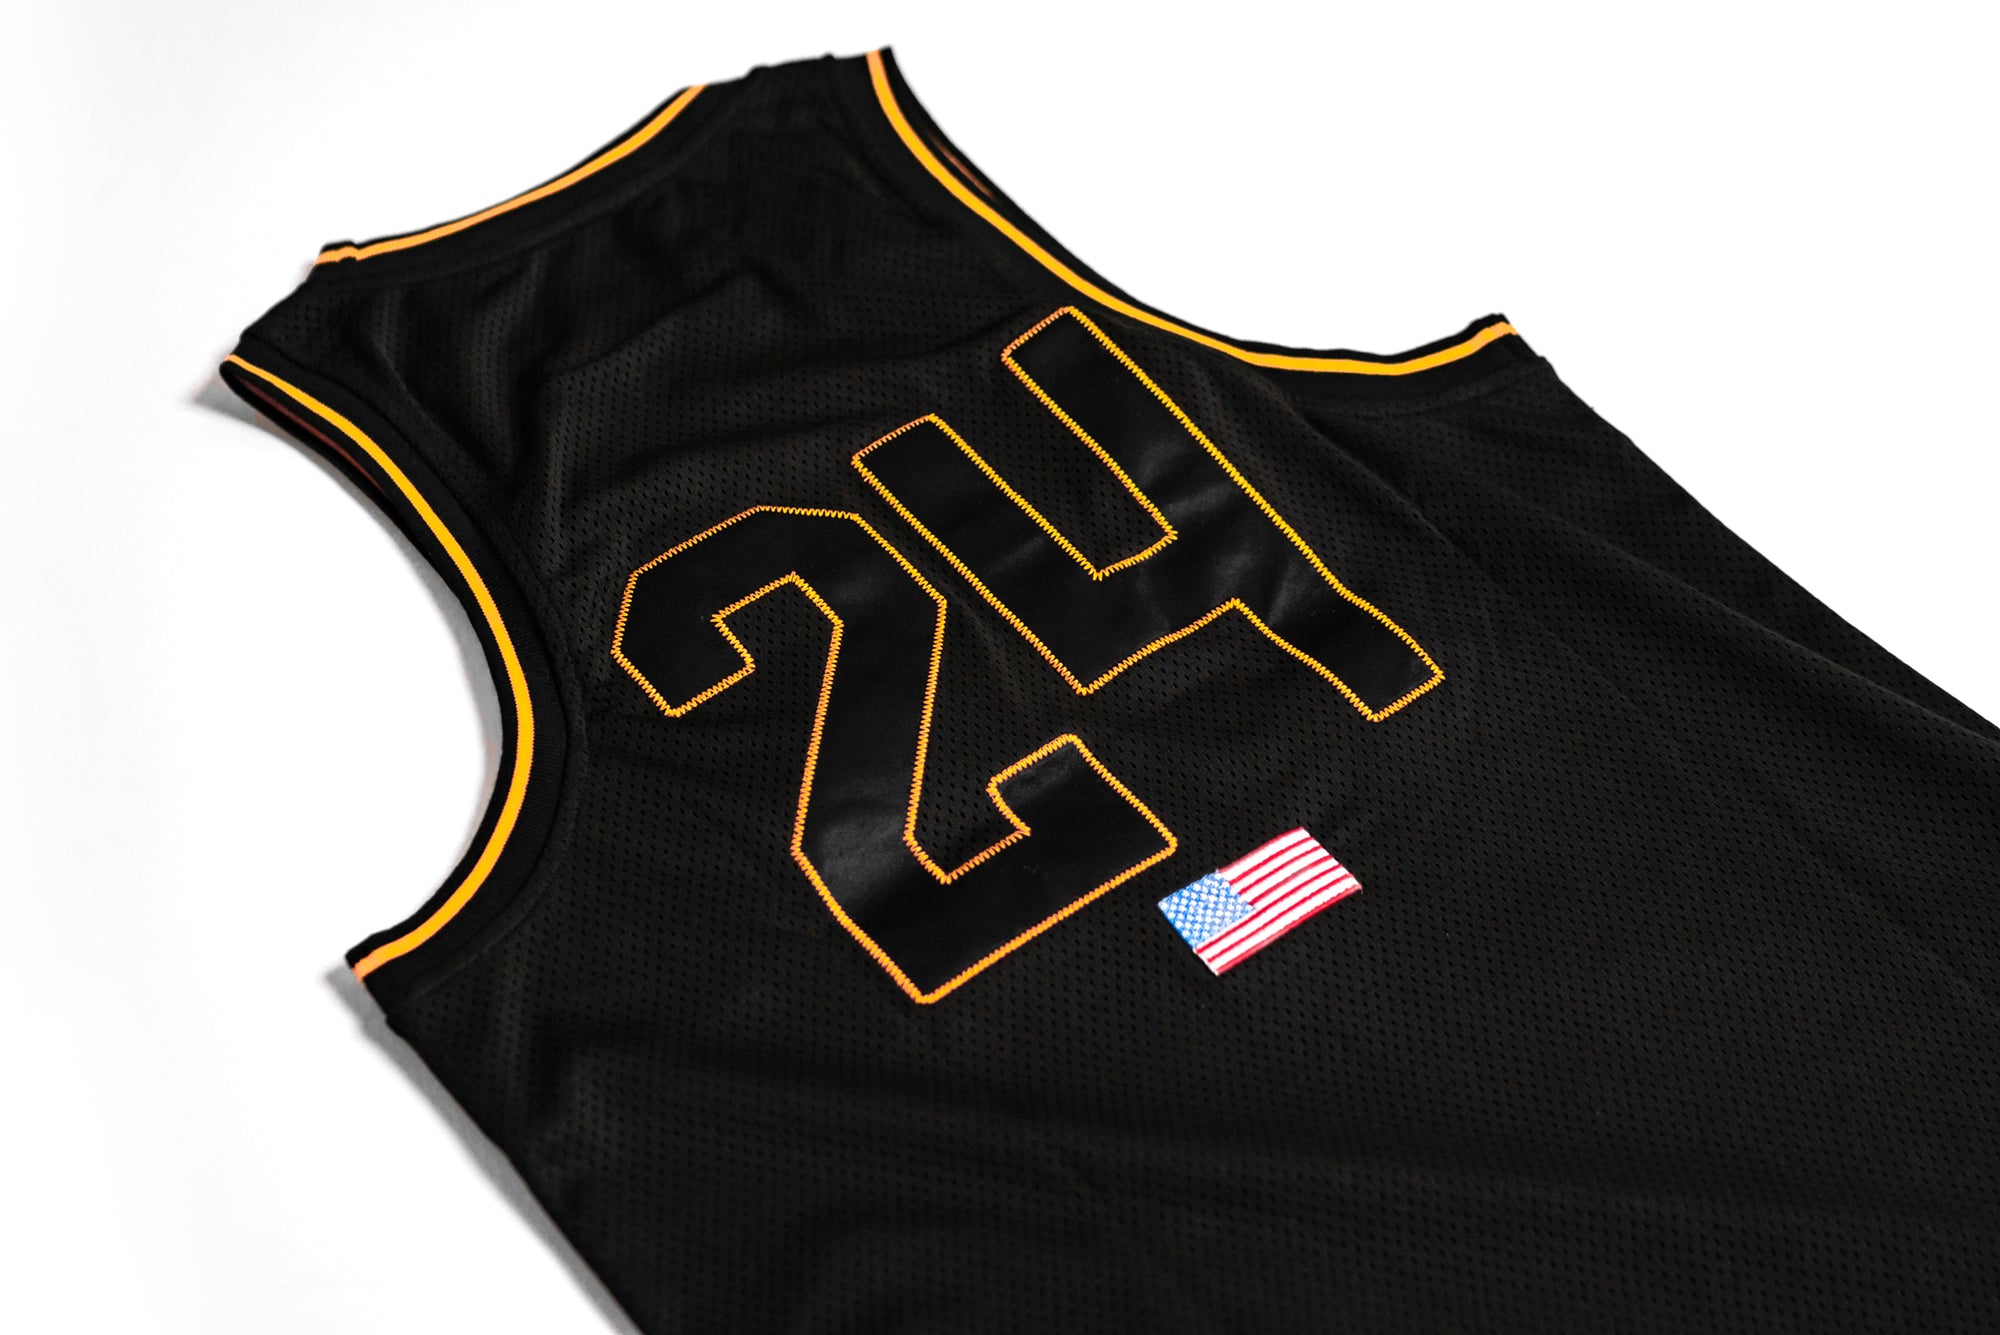 reversible jersey gold